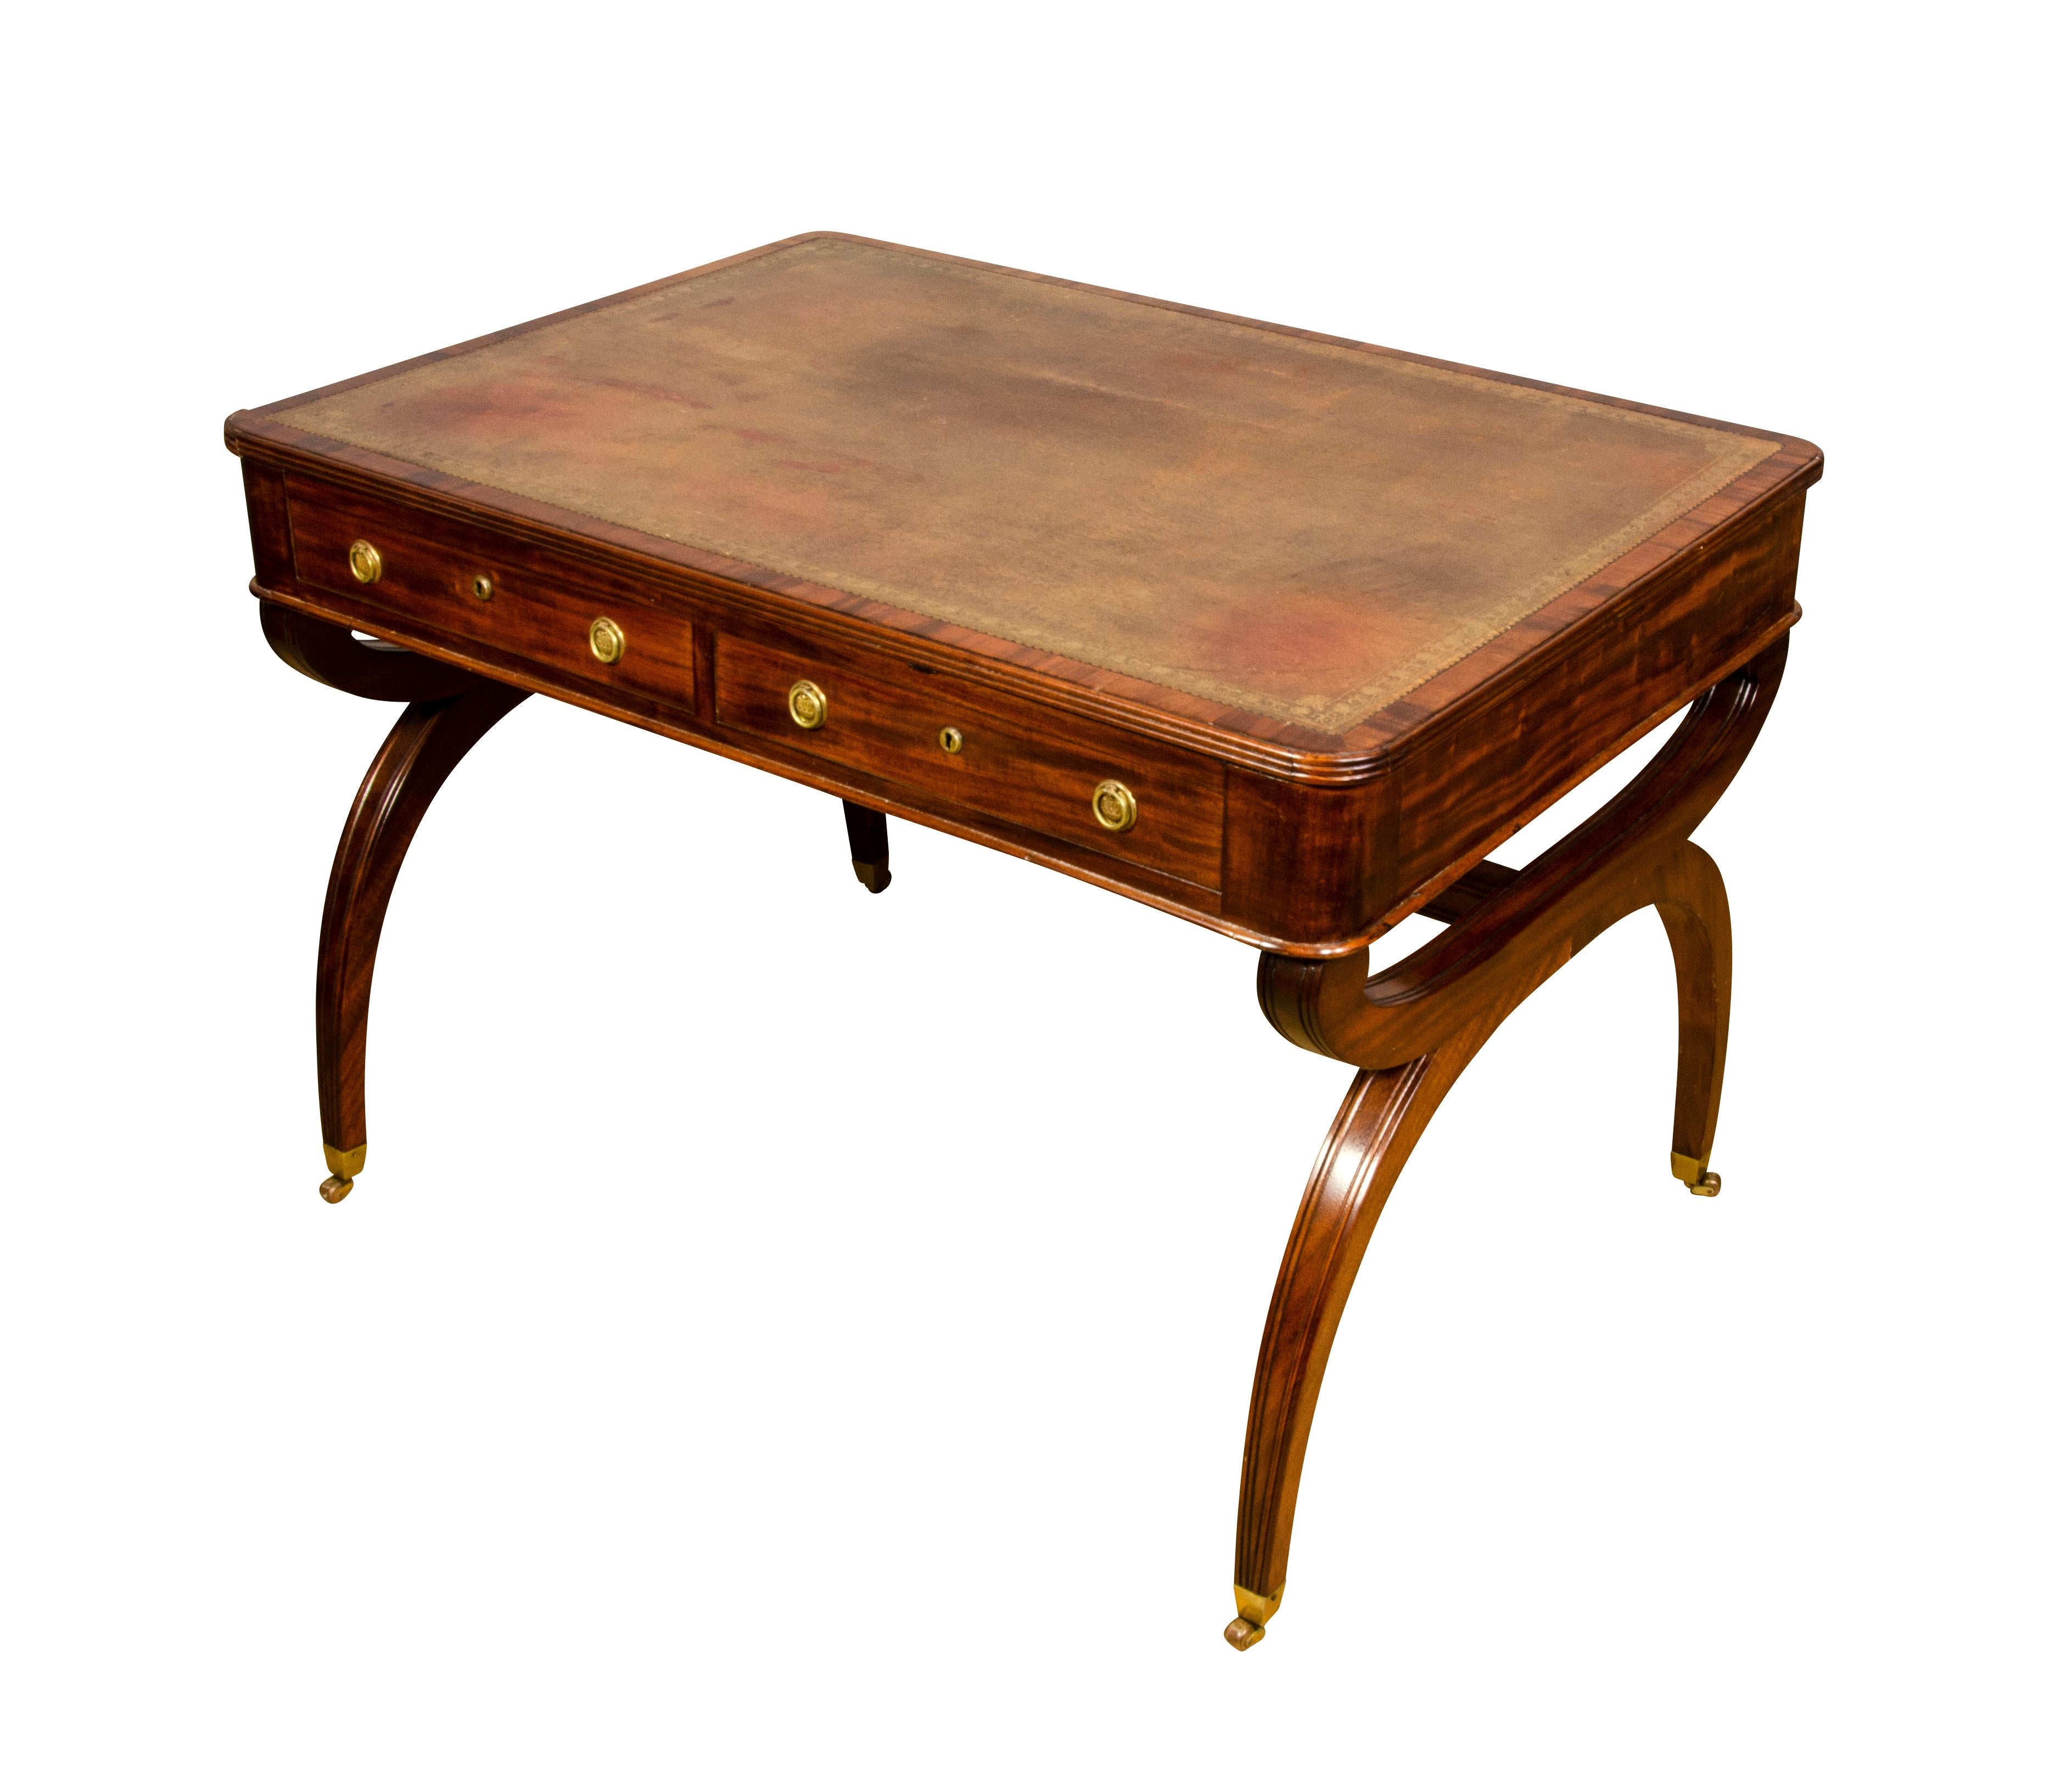 With rectangular top with inset brown leather over a frieze containing two drawers and opposing drawers all with brass ring handles raised on saber legs and casters.